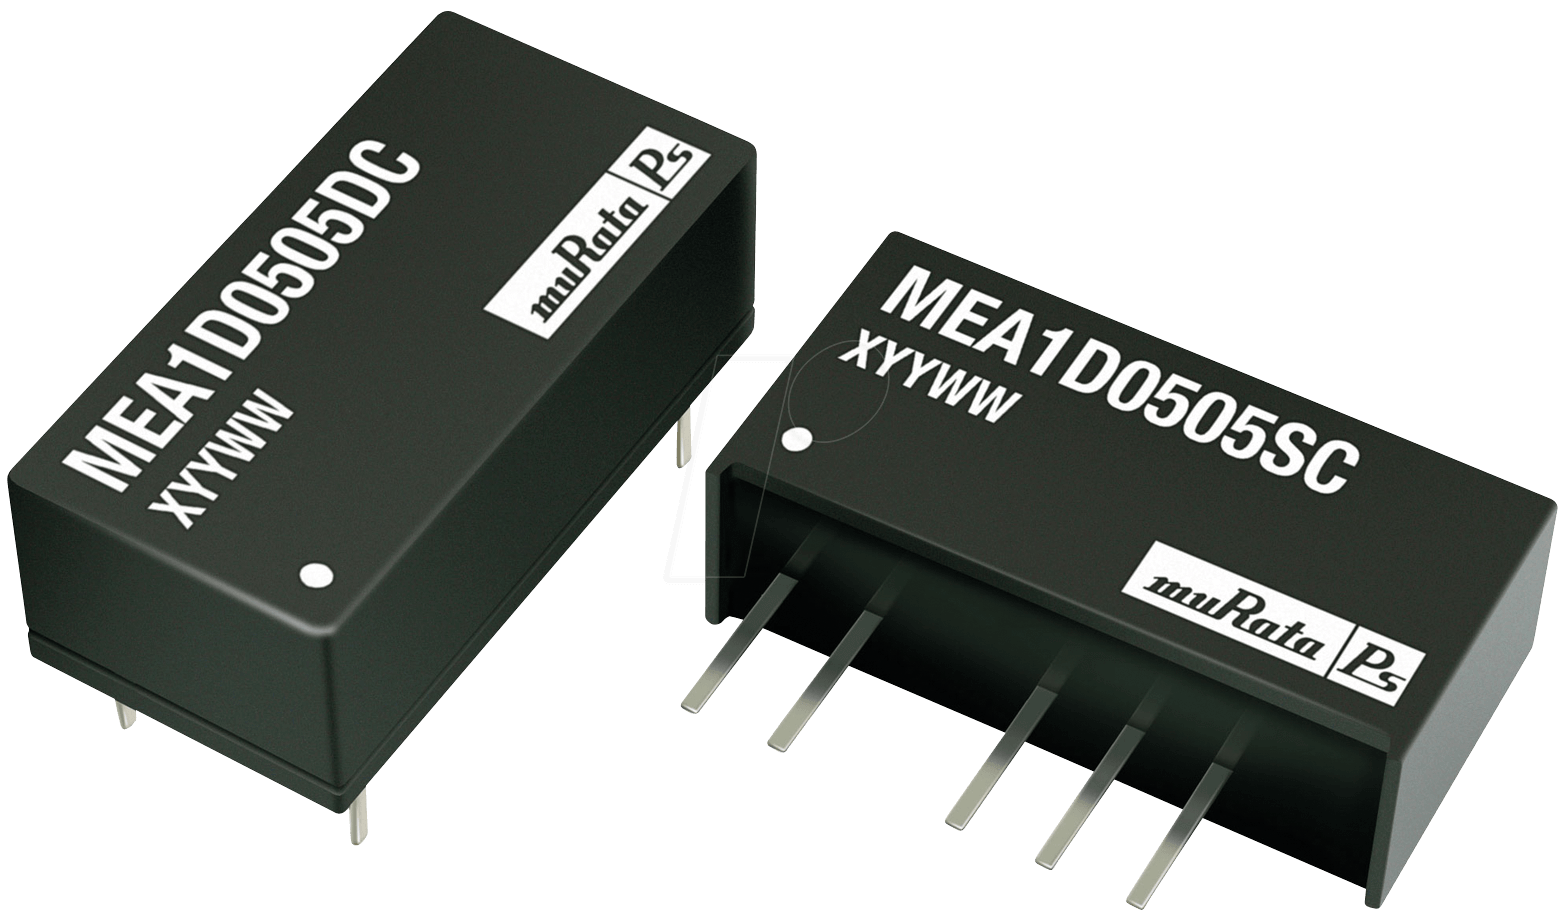 MEA1D0505SC - DC/DC-Wandler MEA, 1 W, 5 V, 100 mA, SIL, Dual von MURATA POWER SOLUTIONS